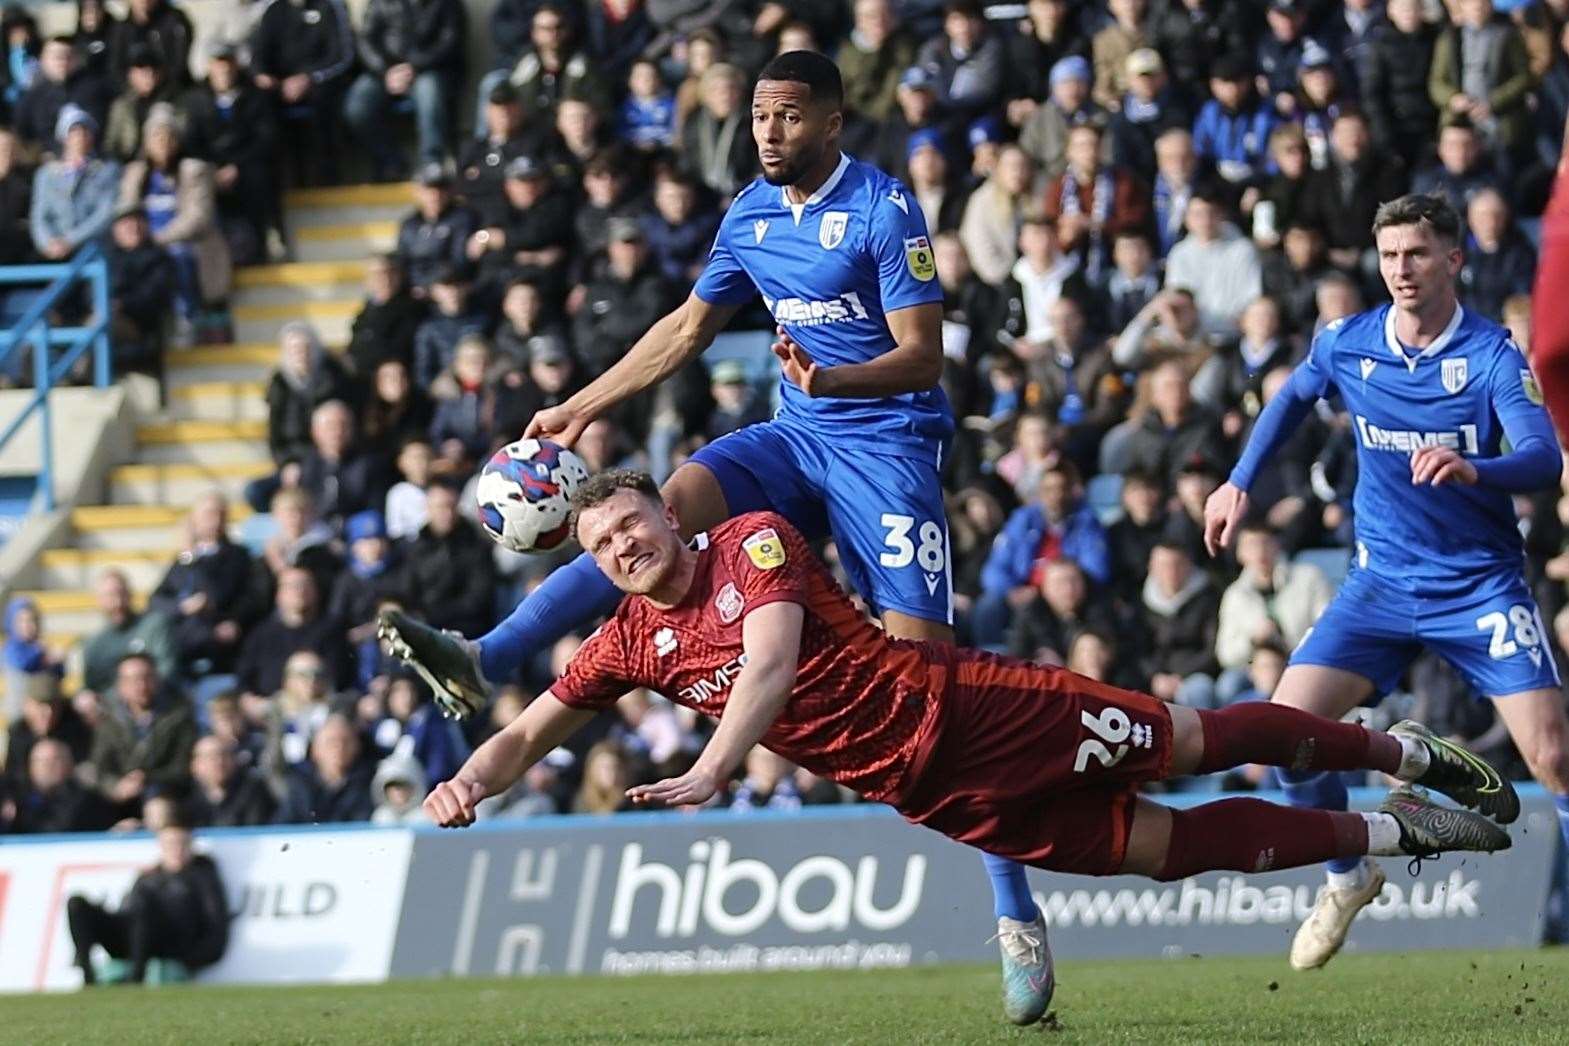 Timothee Dieng challenges for the ball as Gillingham take on Carlisle